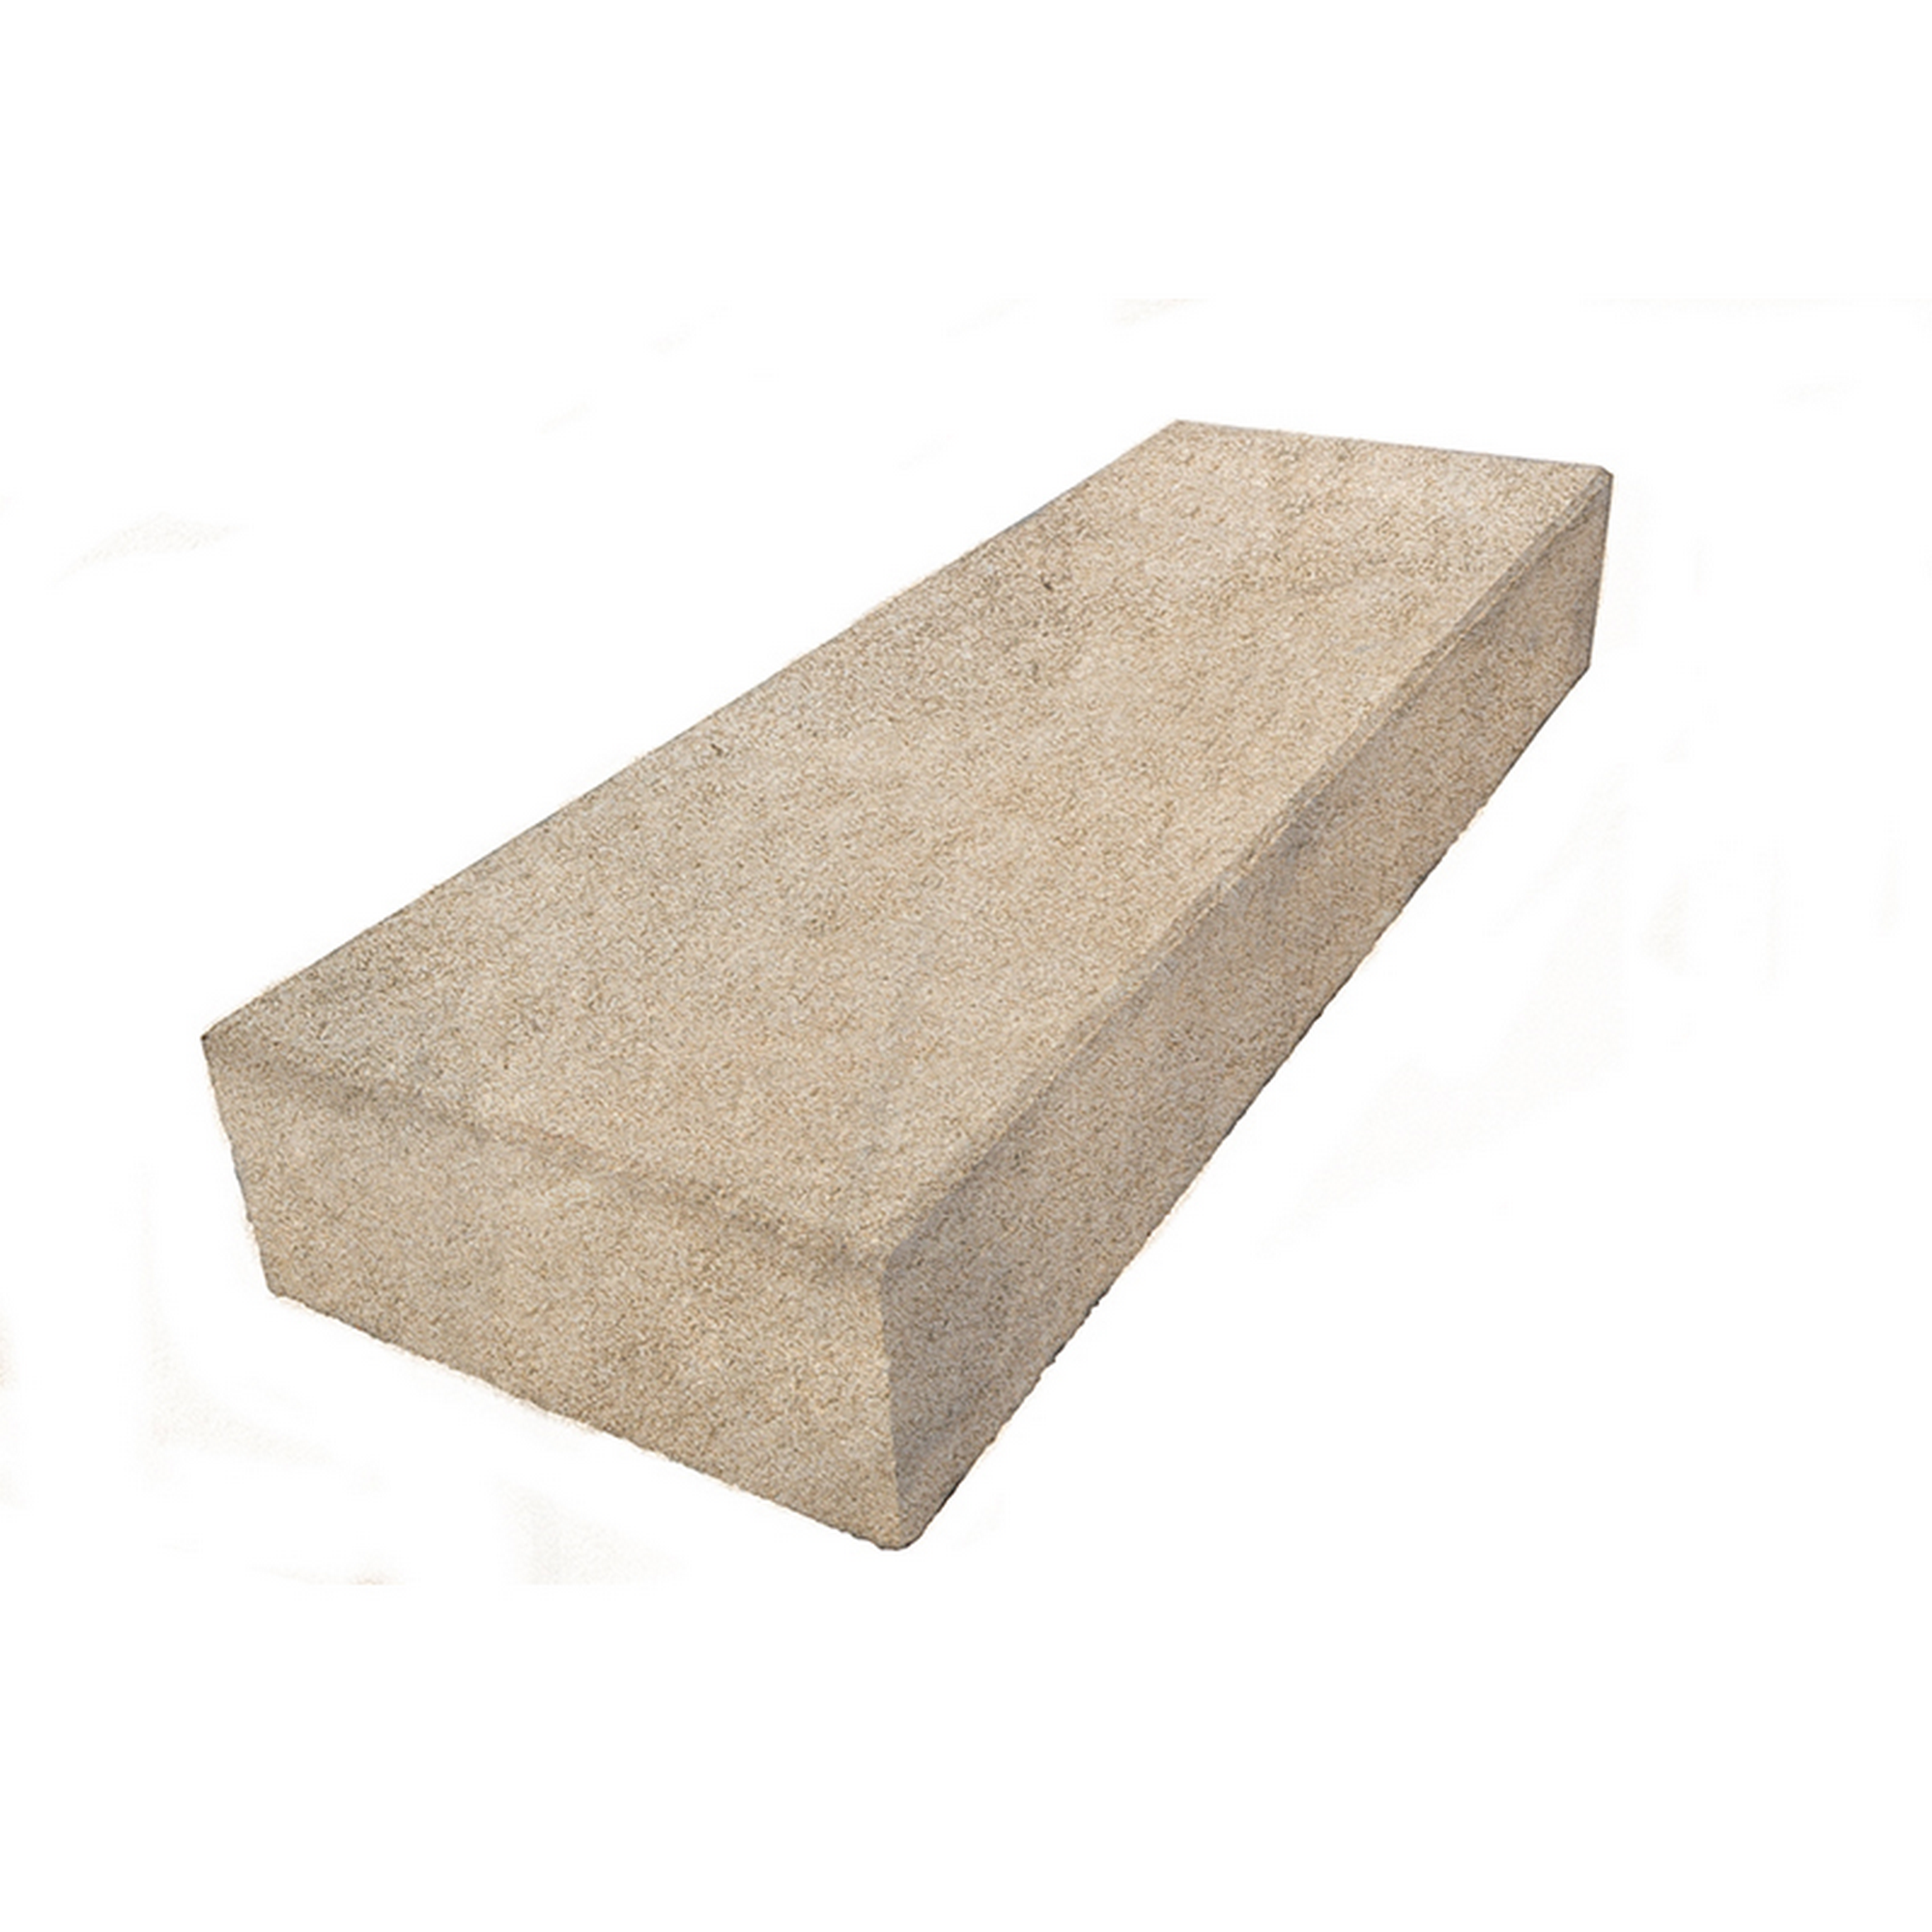 Blockstufe 'T-Stair Solid' Beton sandstein 100 x 35 x 15 cm + product picture